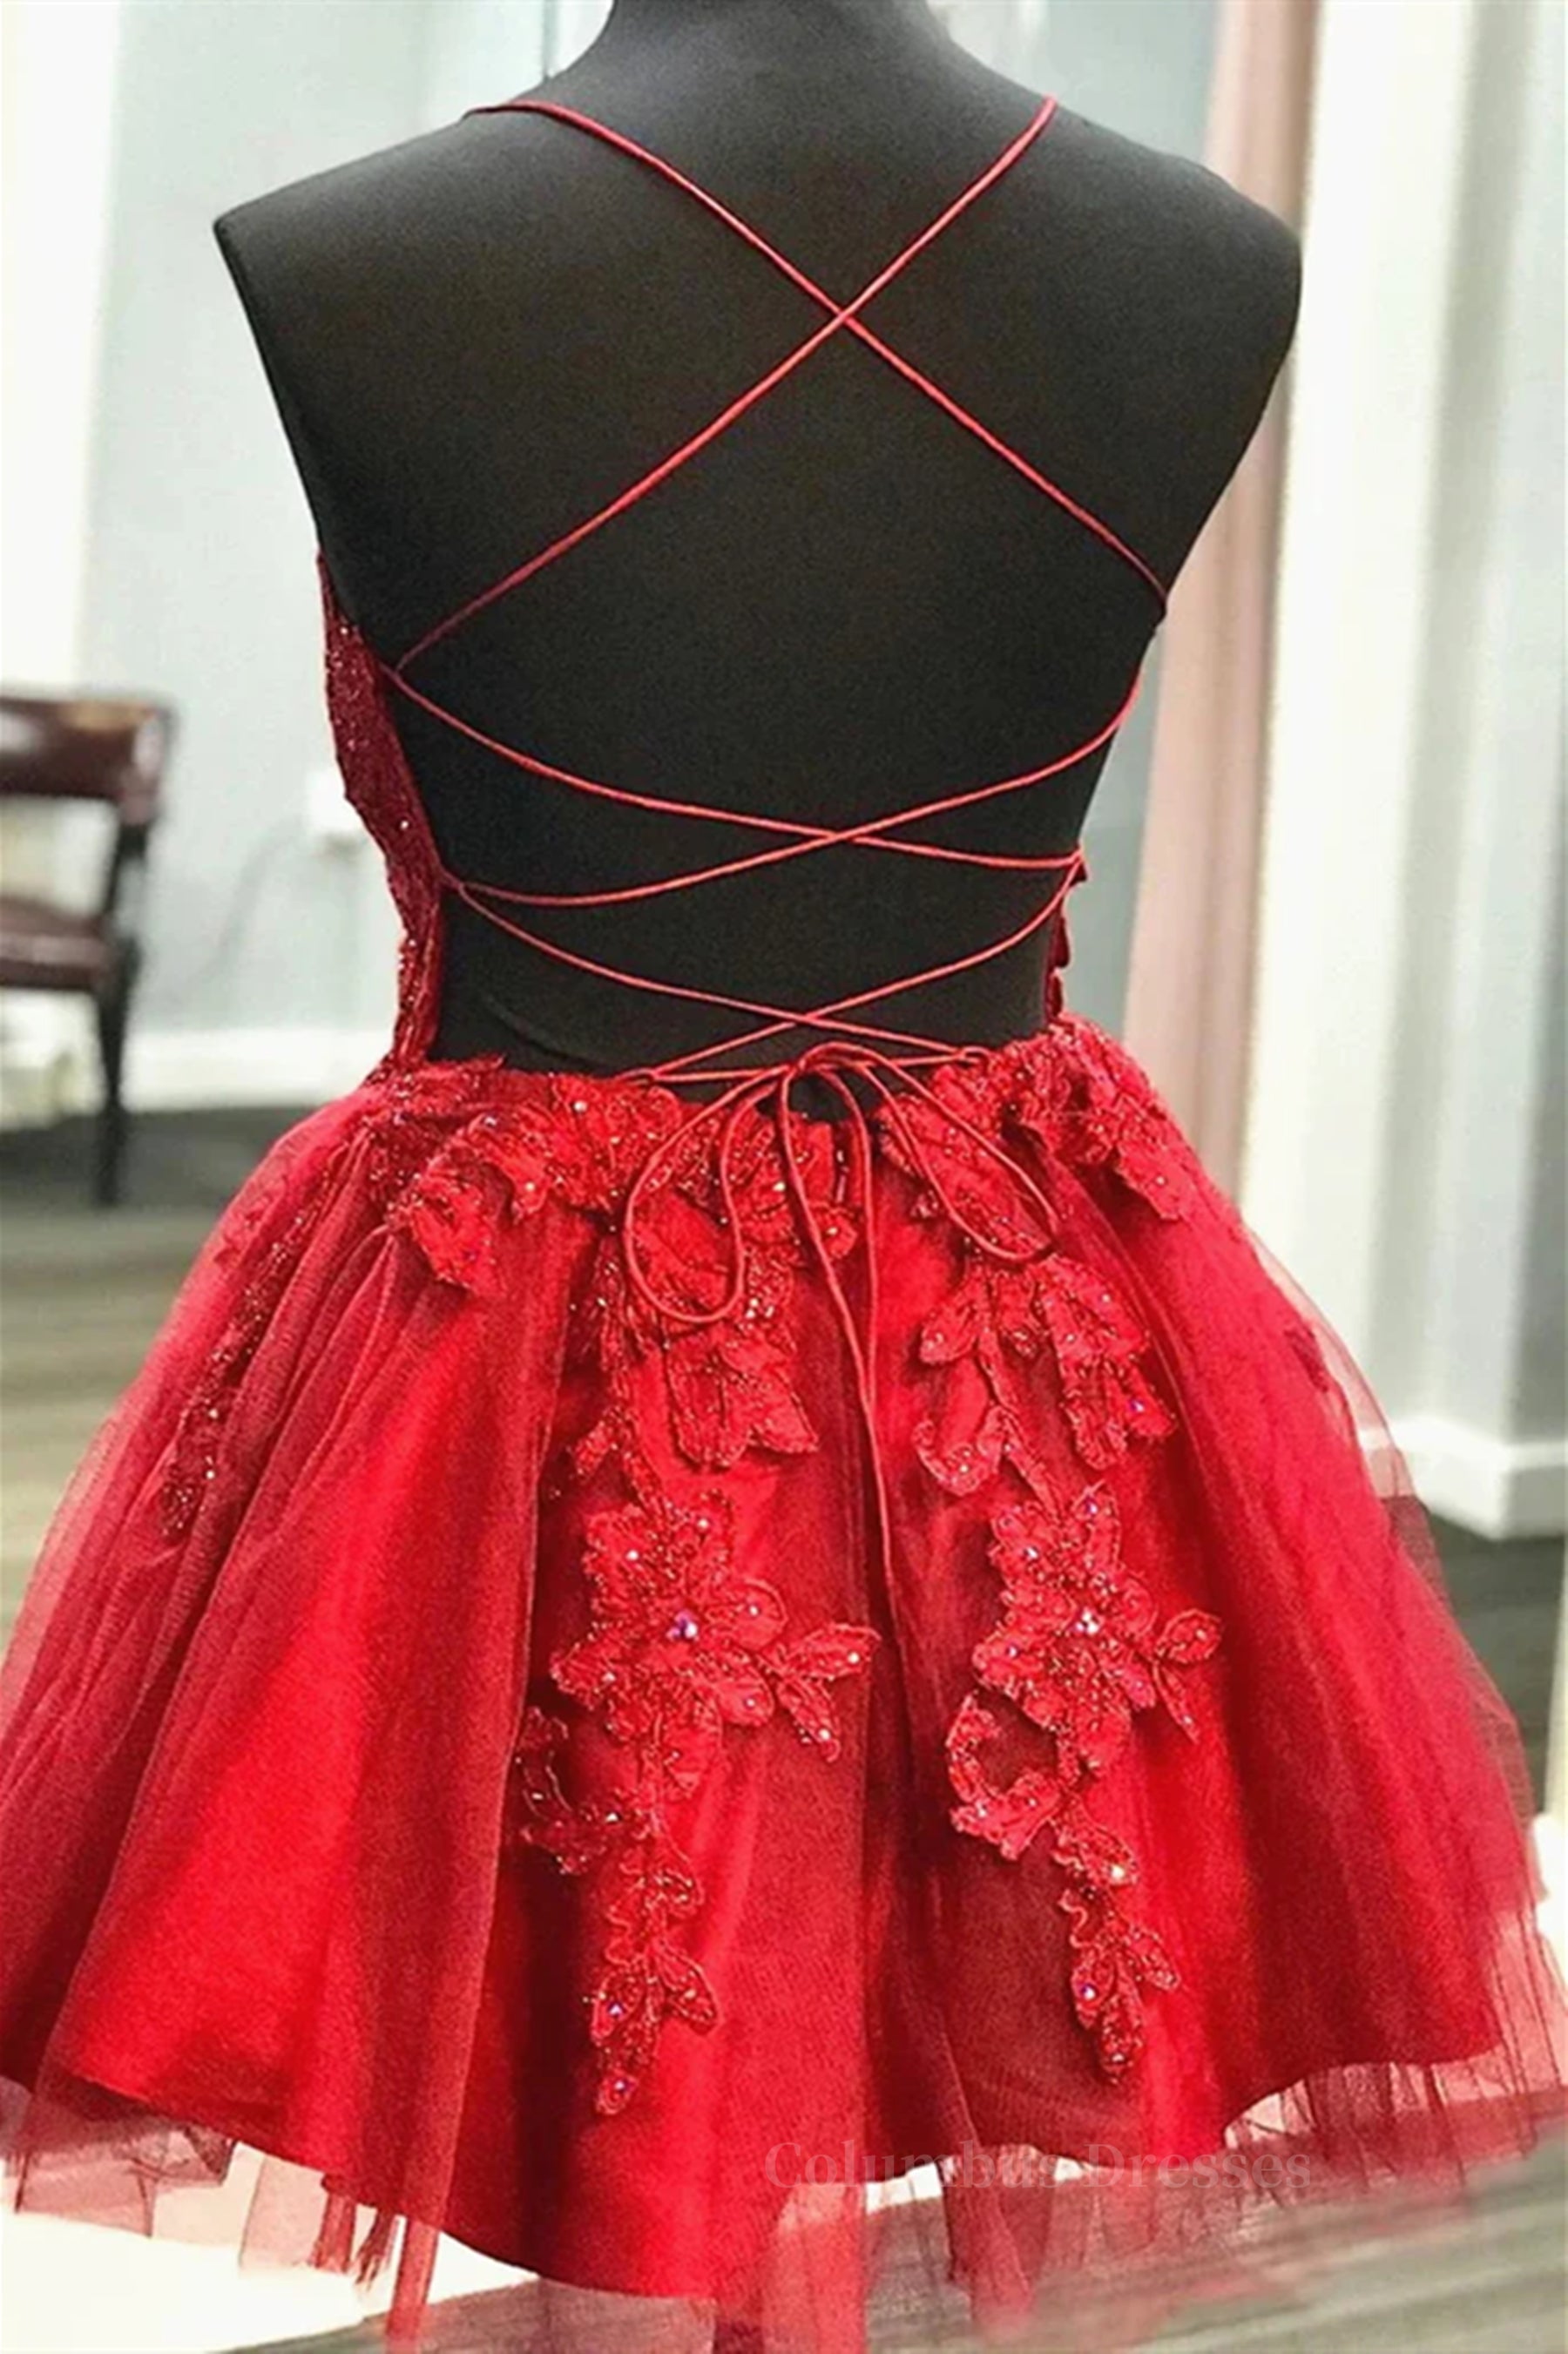 Bridesmaids Dress Designs, A Line V Neck Short Red Lace Prom Dresses, Short Red Lace Formal Homecoming Dresses